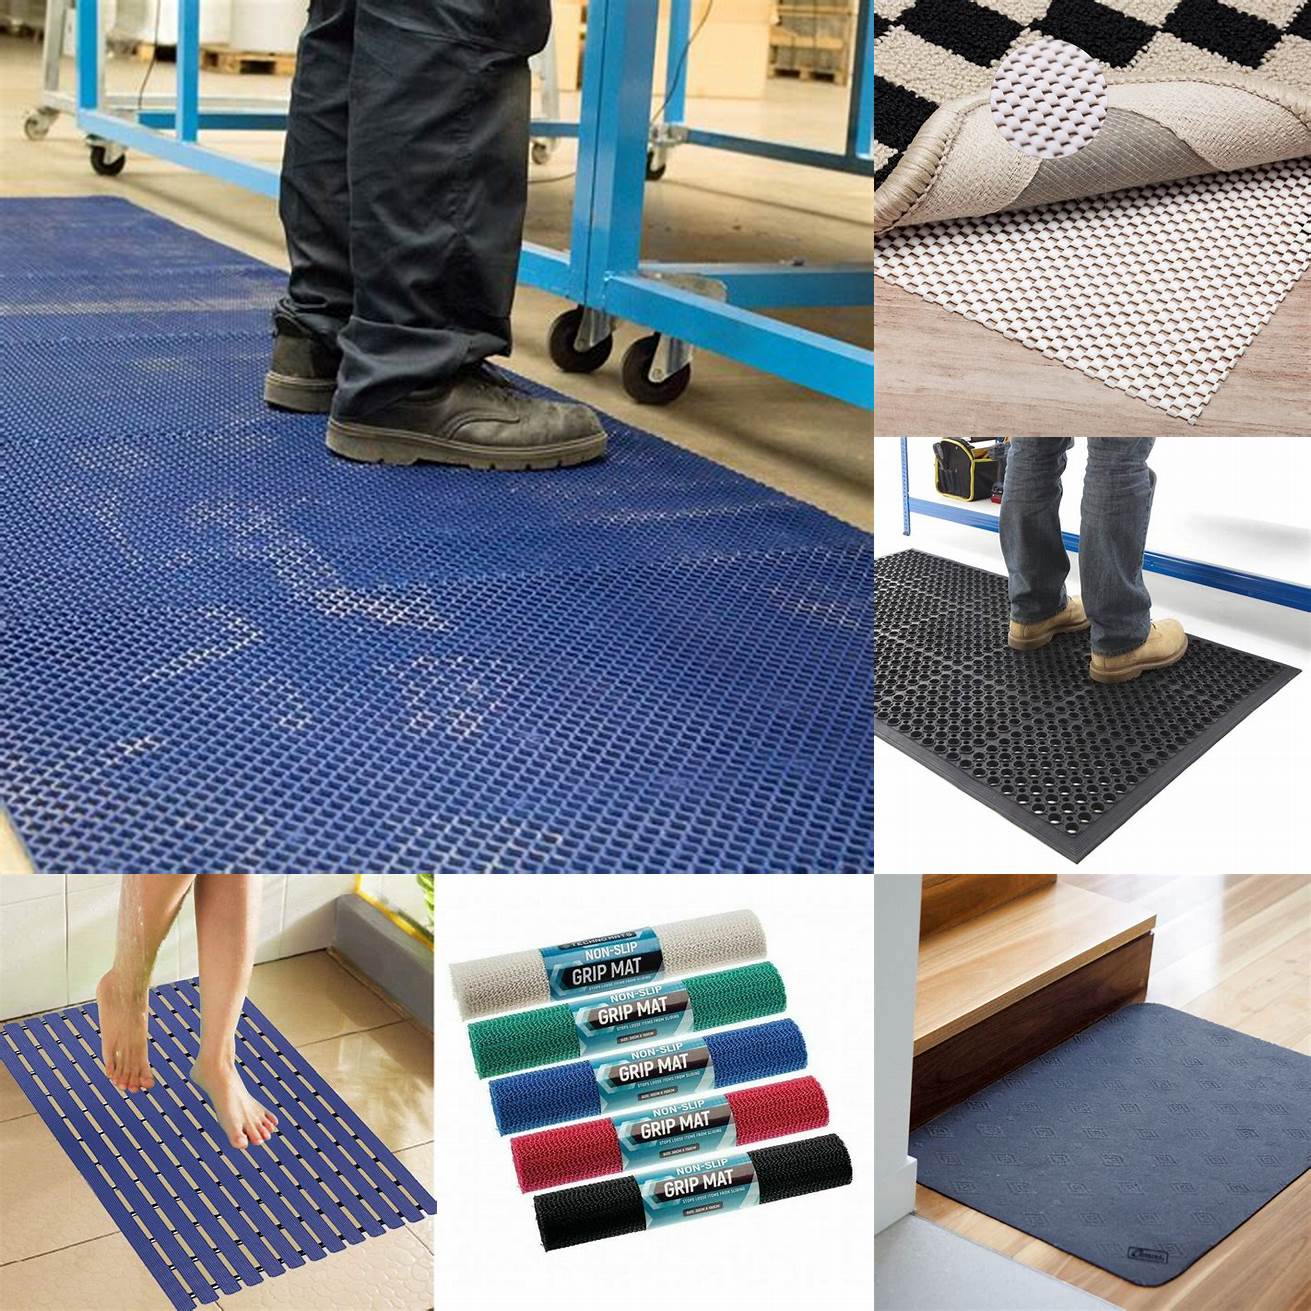 Non-slip mats - Non-slip mats are designed to prevent slips and falls They have a textured surface that provides traction even when wet